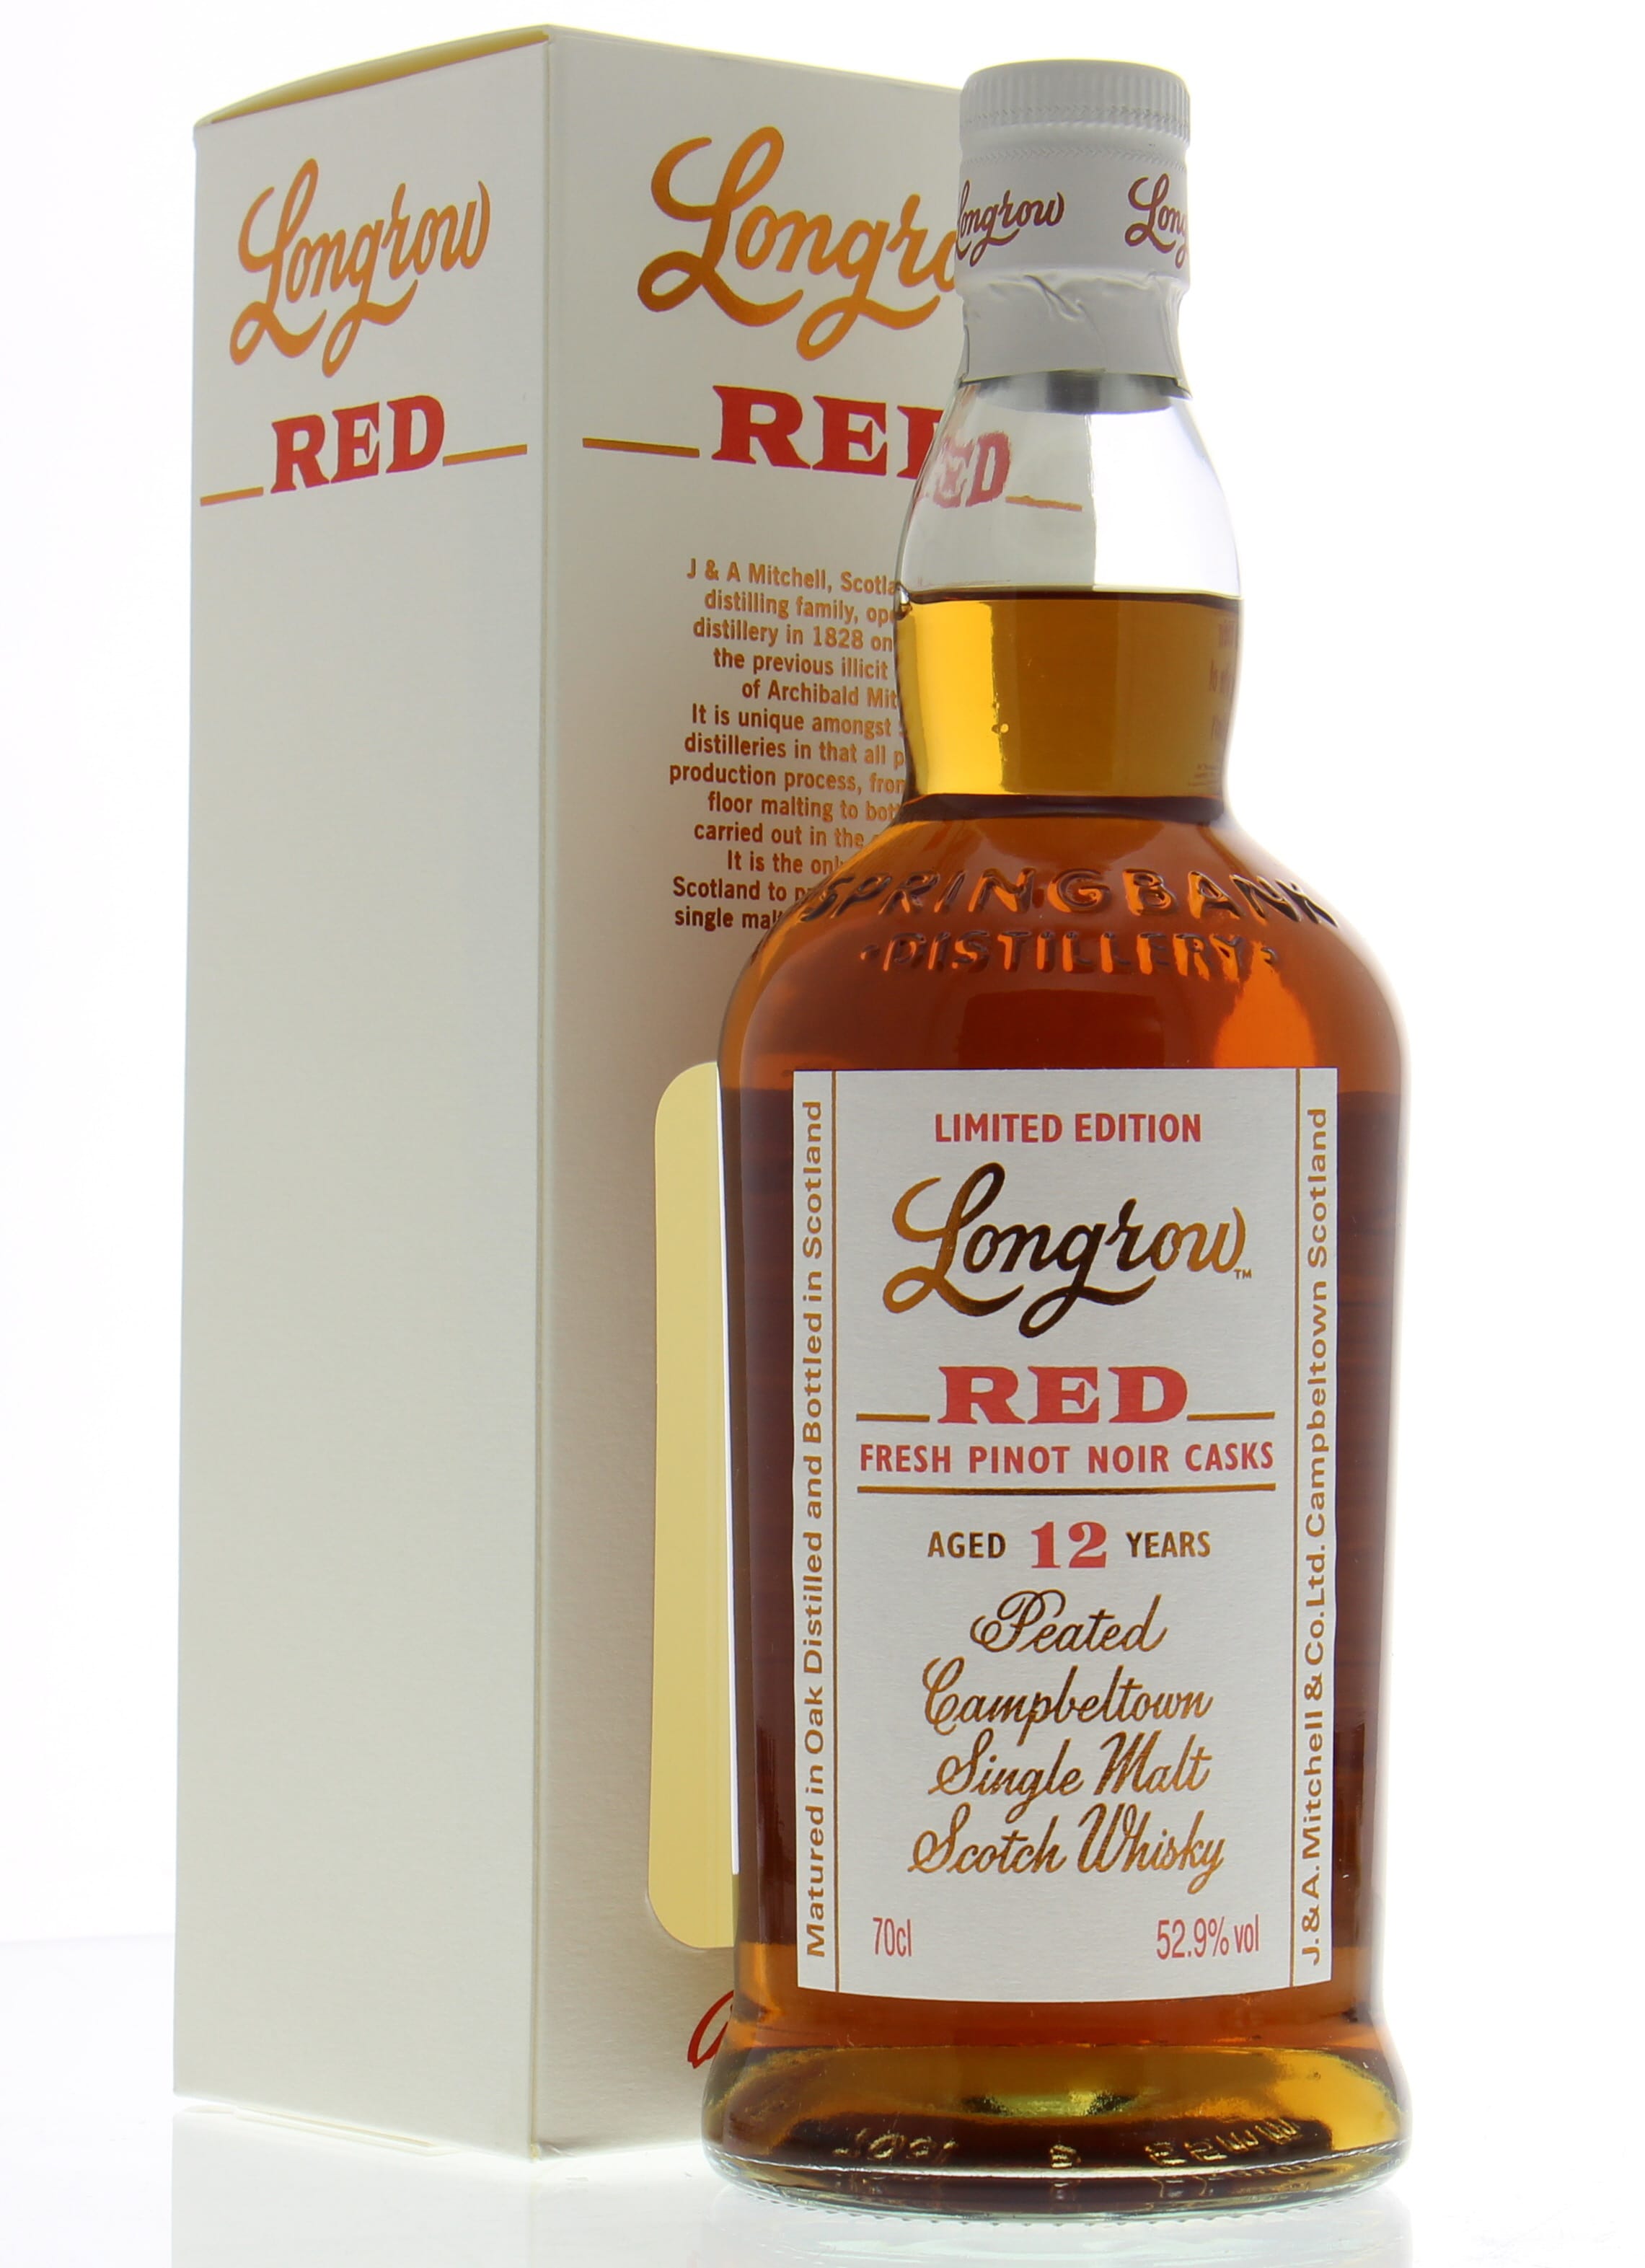 Longrow - Red 12 Years Old Fresh Pinot Noir Casks 52.9% NV In Original Container